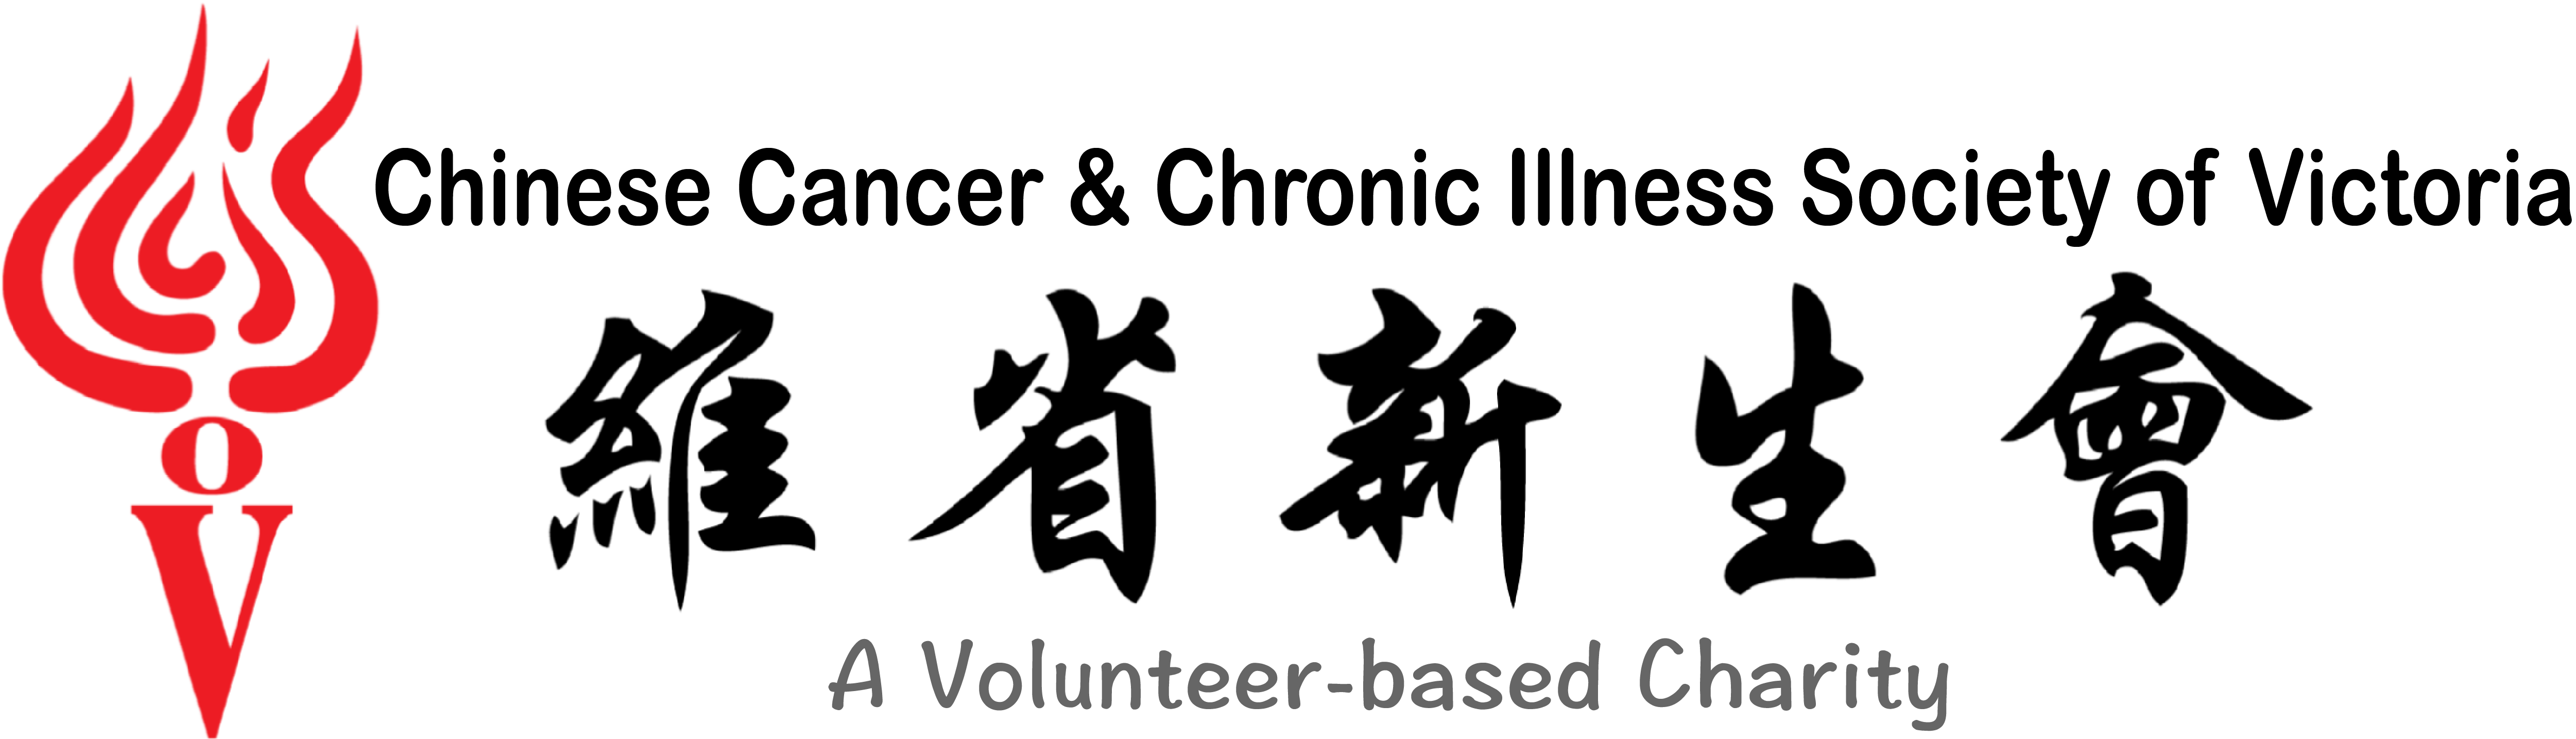 Chinese Community Peer Support Group